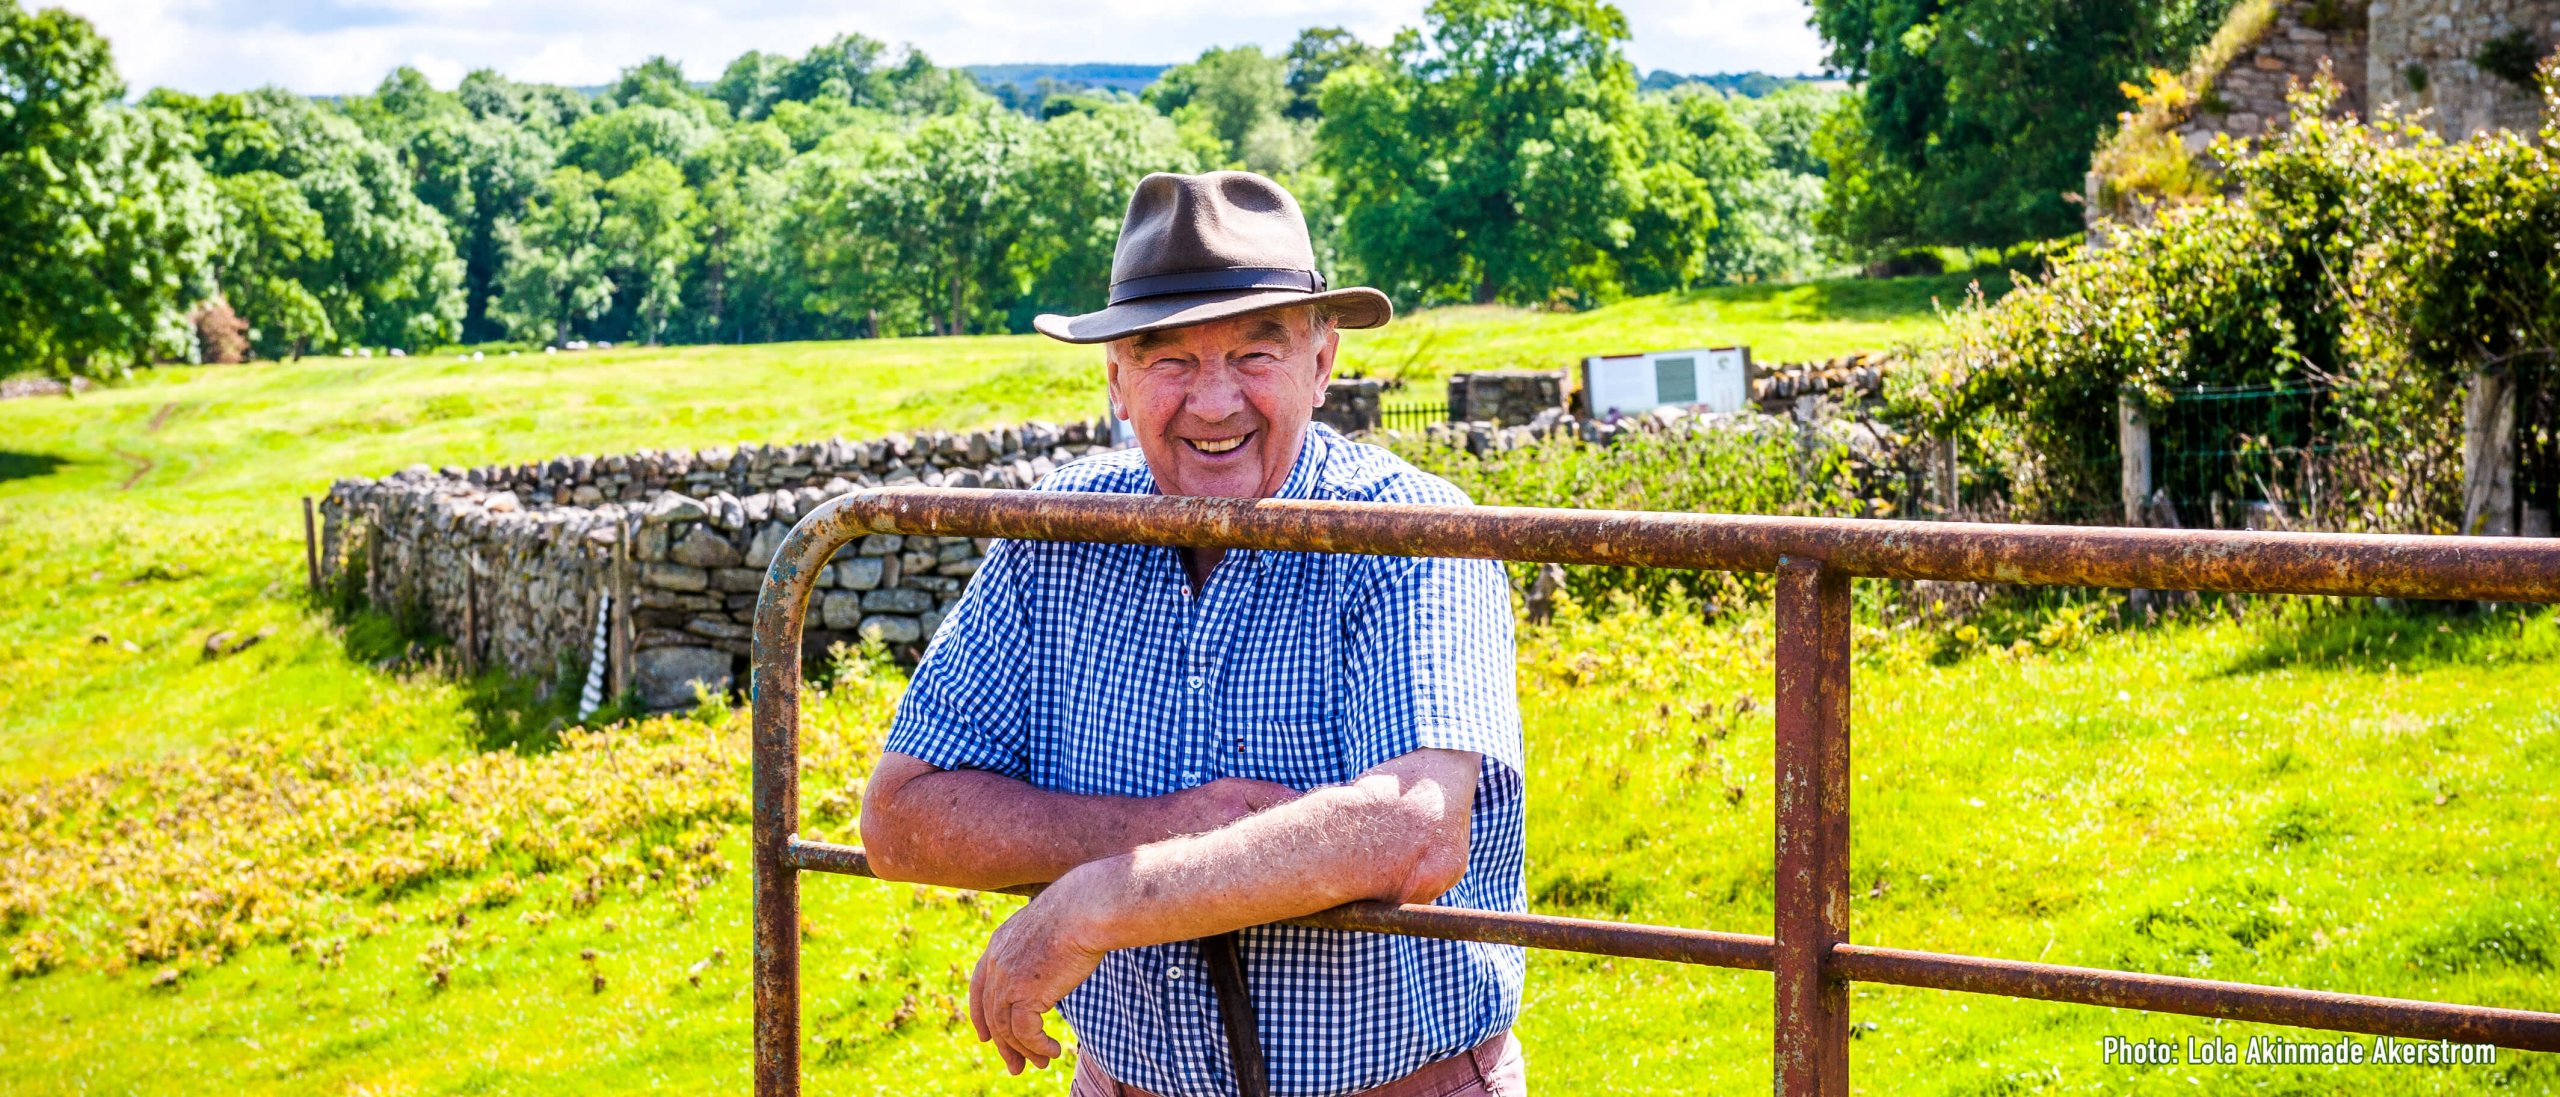 Smiling Irish male middle aged tour guide with a hat leaning on gate at Jerpoint in Kilkenny, Ireland